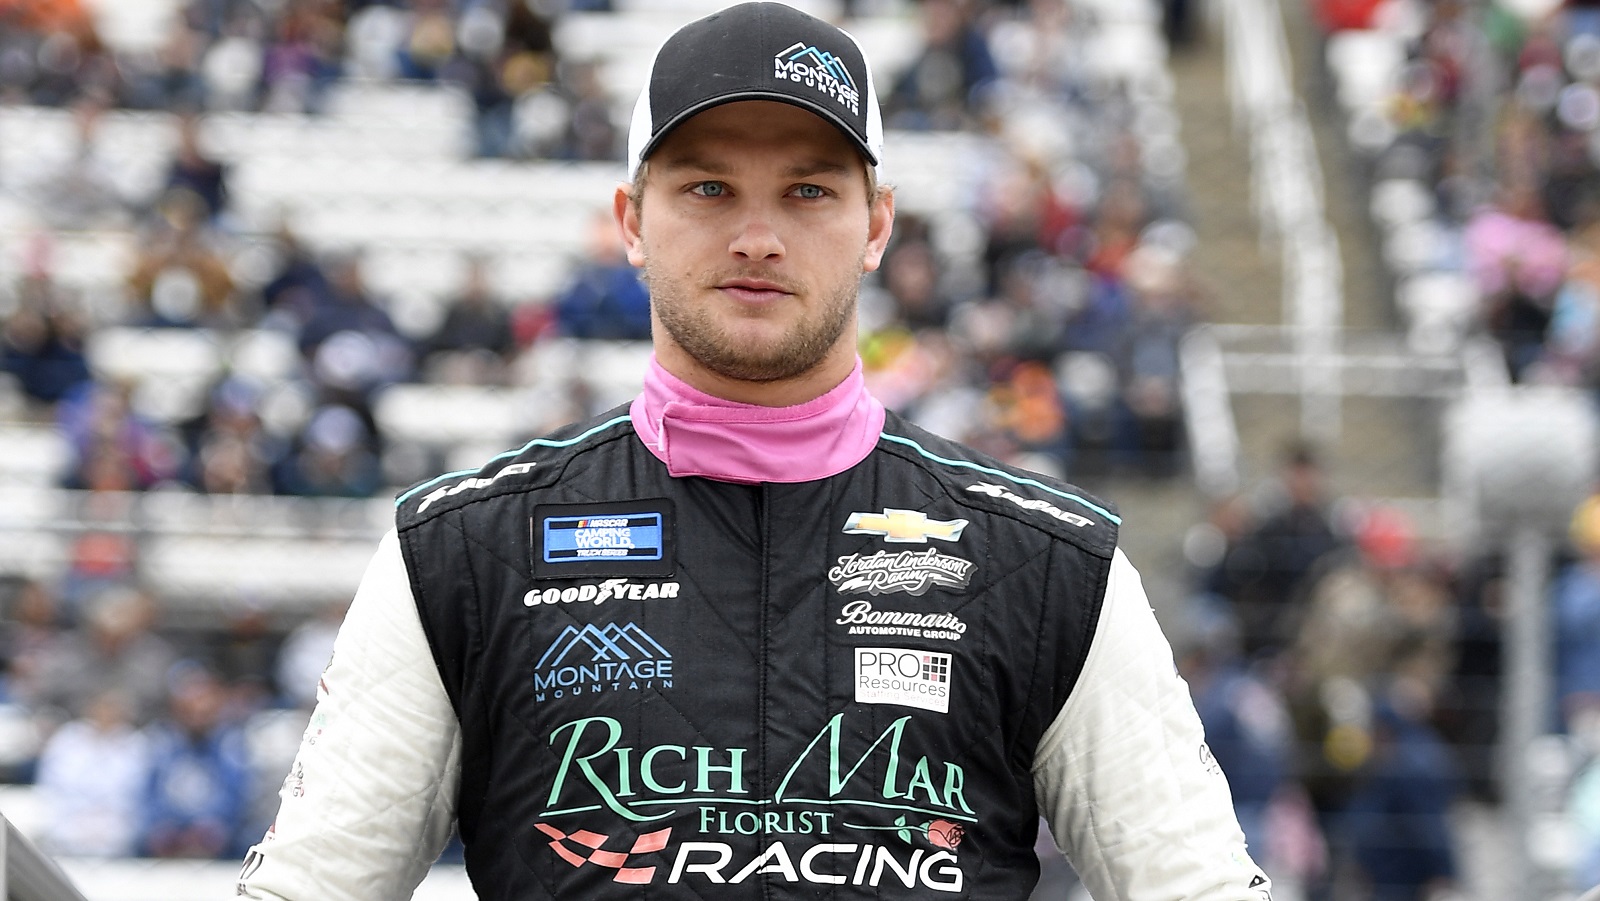 Sage Karam walks on stage during ceremonies prior to the NASCAR Camping World Truck Series United Rentals 200 at Martinsville Speedway on Oct. 30, 2021. | Logan Riely/Getty Images